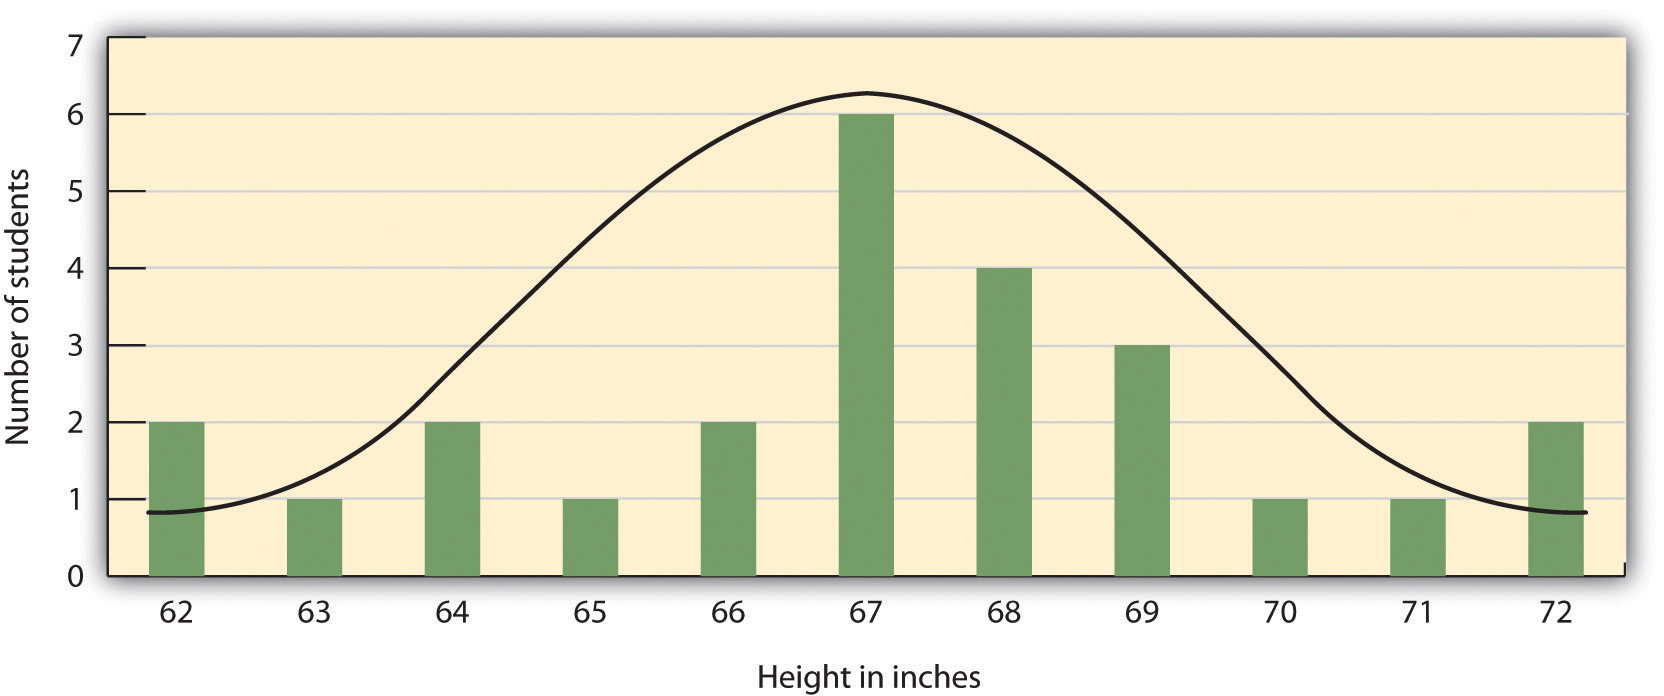 The distribution of the heights of the students in a class will form a normal distribution. In this sample the mean (M) = 67.12 and the standard deviation (s) = 2.74.